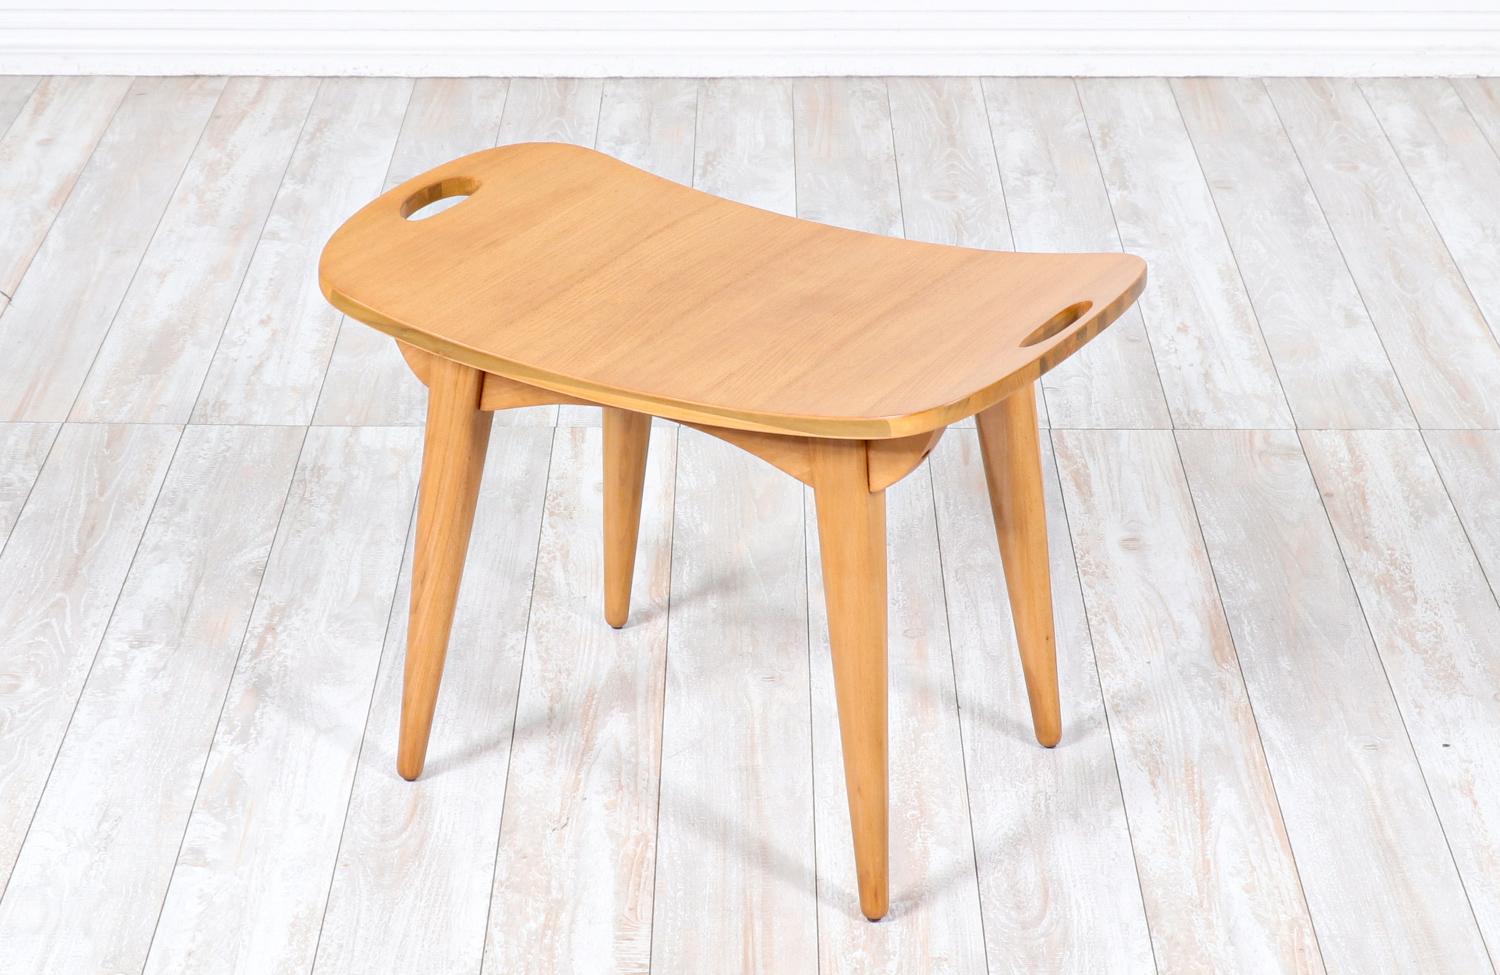 Expertly Restored - Mid-Century Modern Sculpted Primavera Wood Stool In Excellent Condition For Sale In Los Angeles, CA